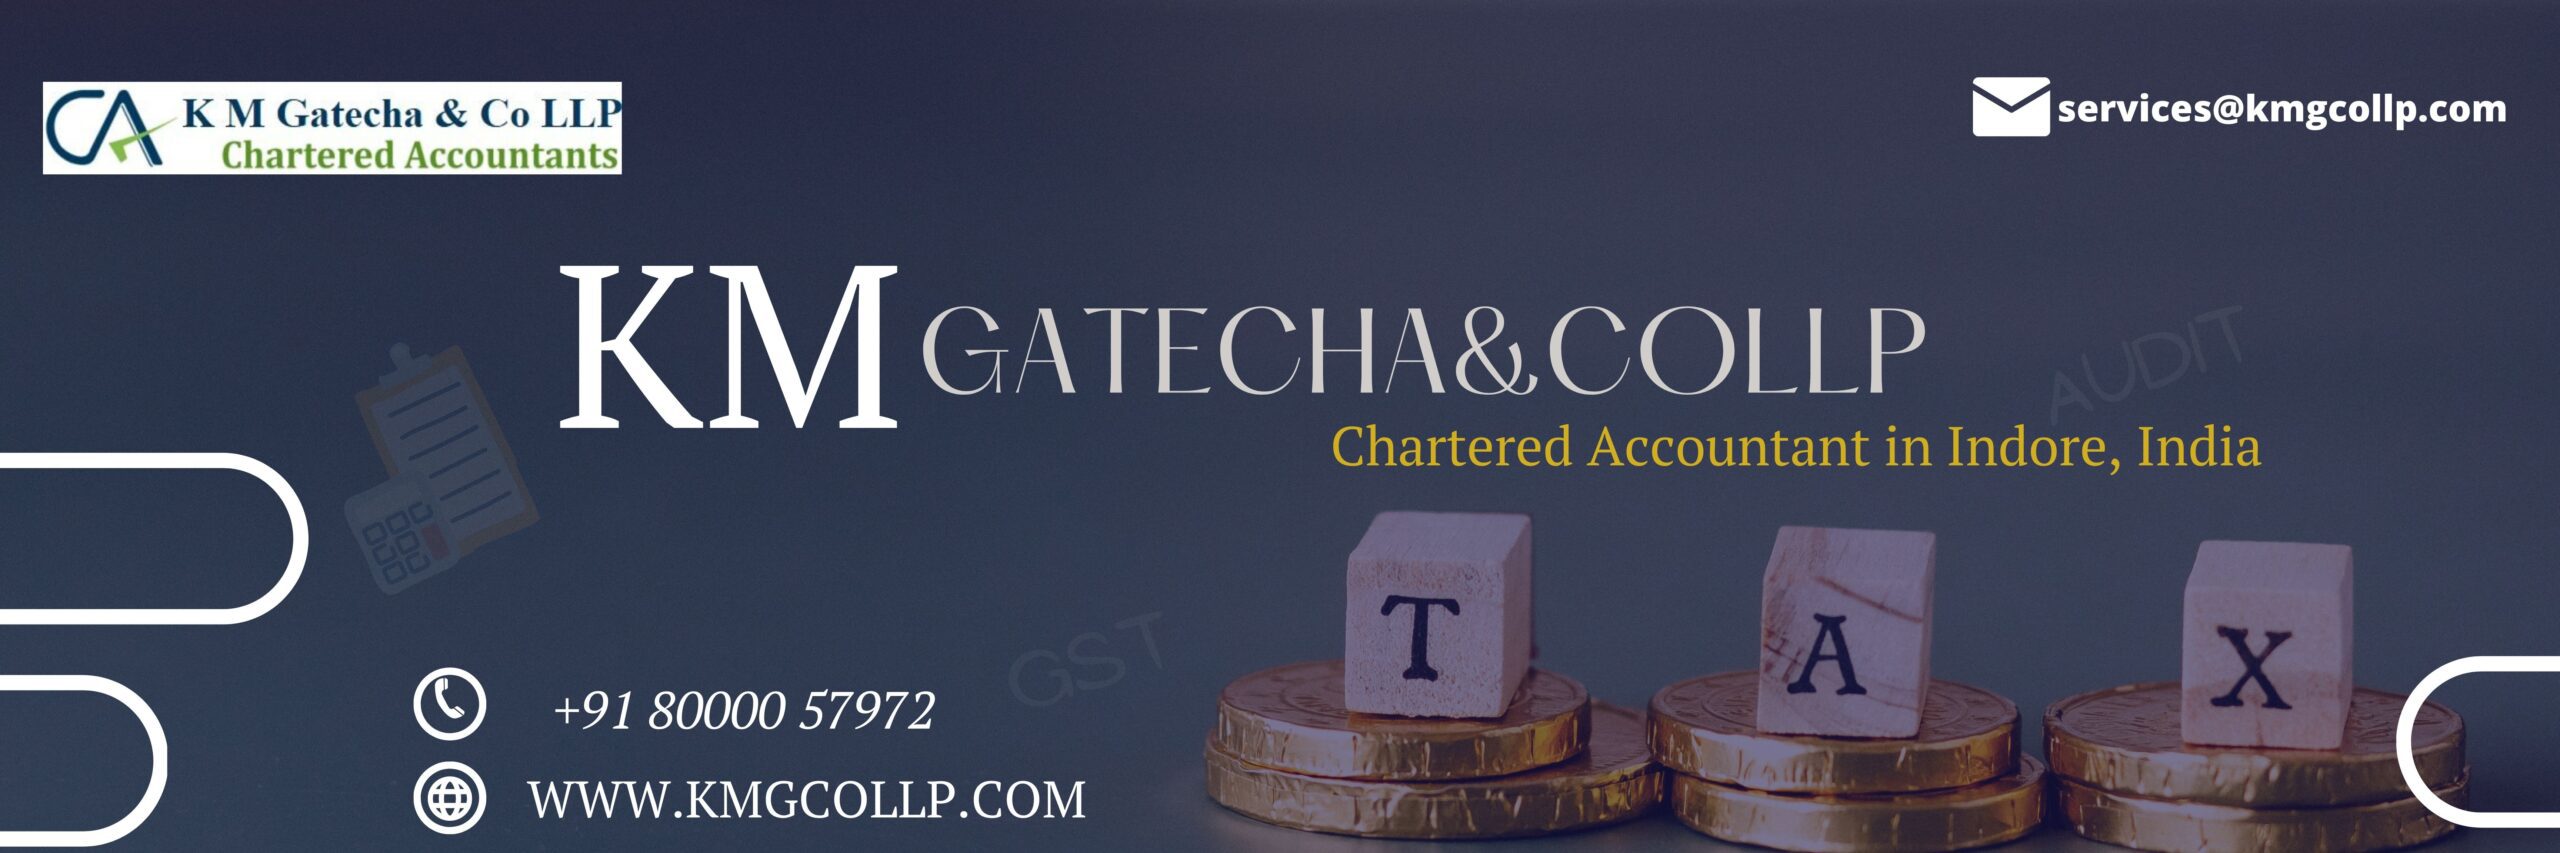 ca chartered accountant in indore, india